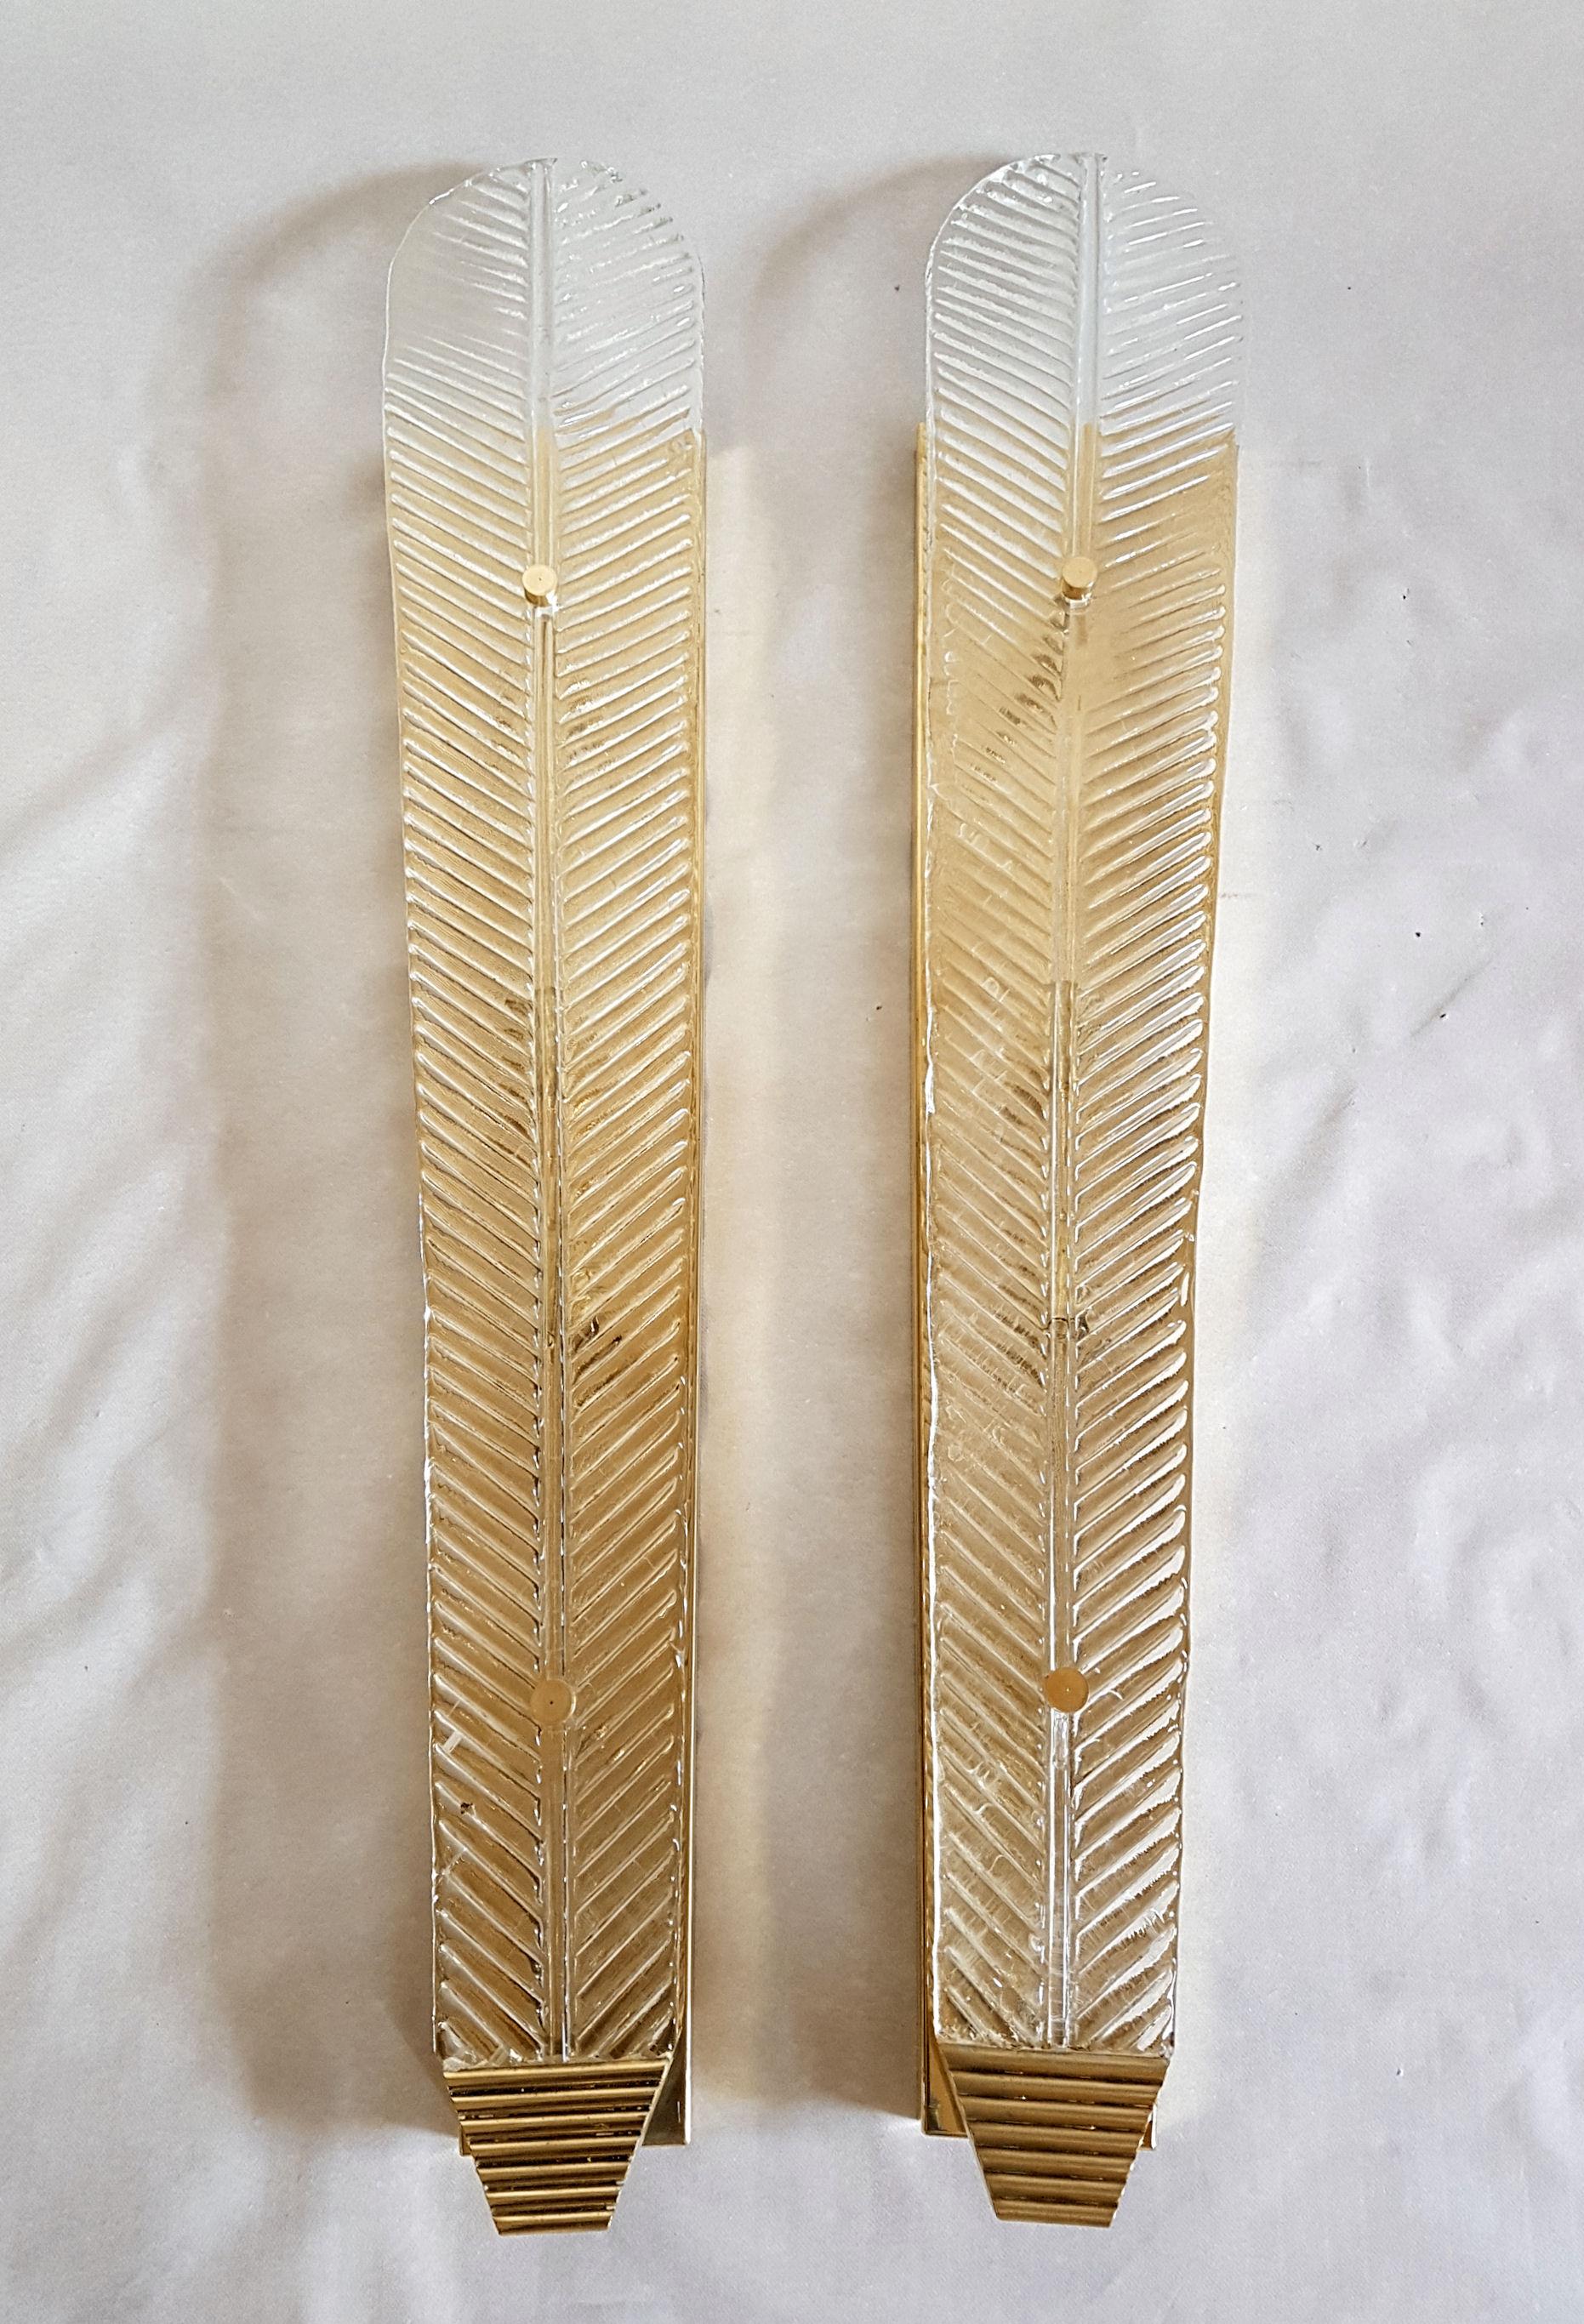 Very tall, long and thin pair of wall sconces, by Barovier & Toso, Italy, 1960s.
Made of polished brass mounts, and hand made Murano clear glass leaves.
The veins of the glass leaves make them translucent.
2 lights, medium base, rewired for the